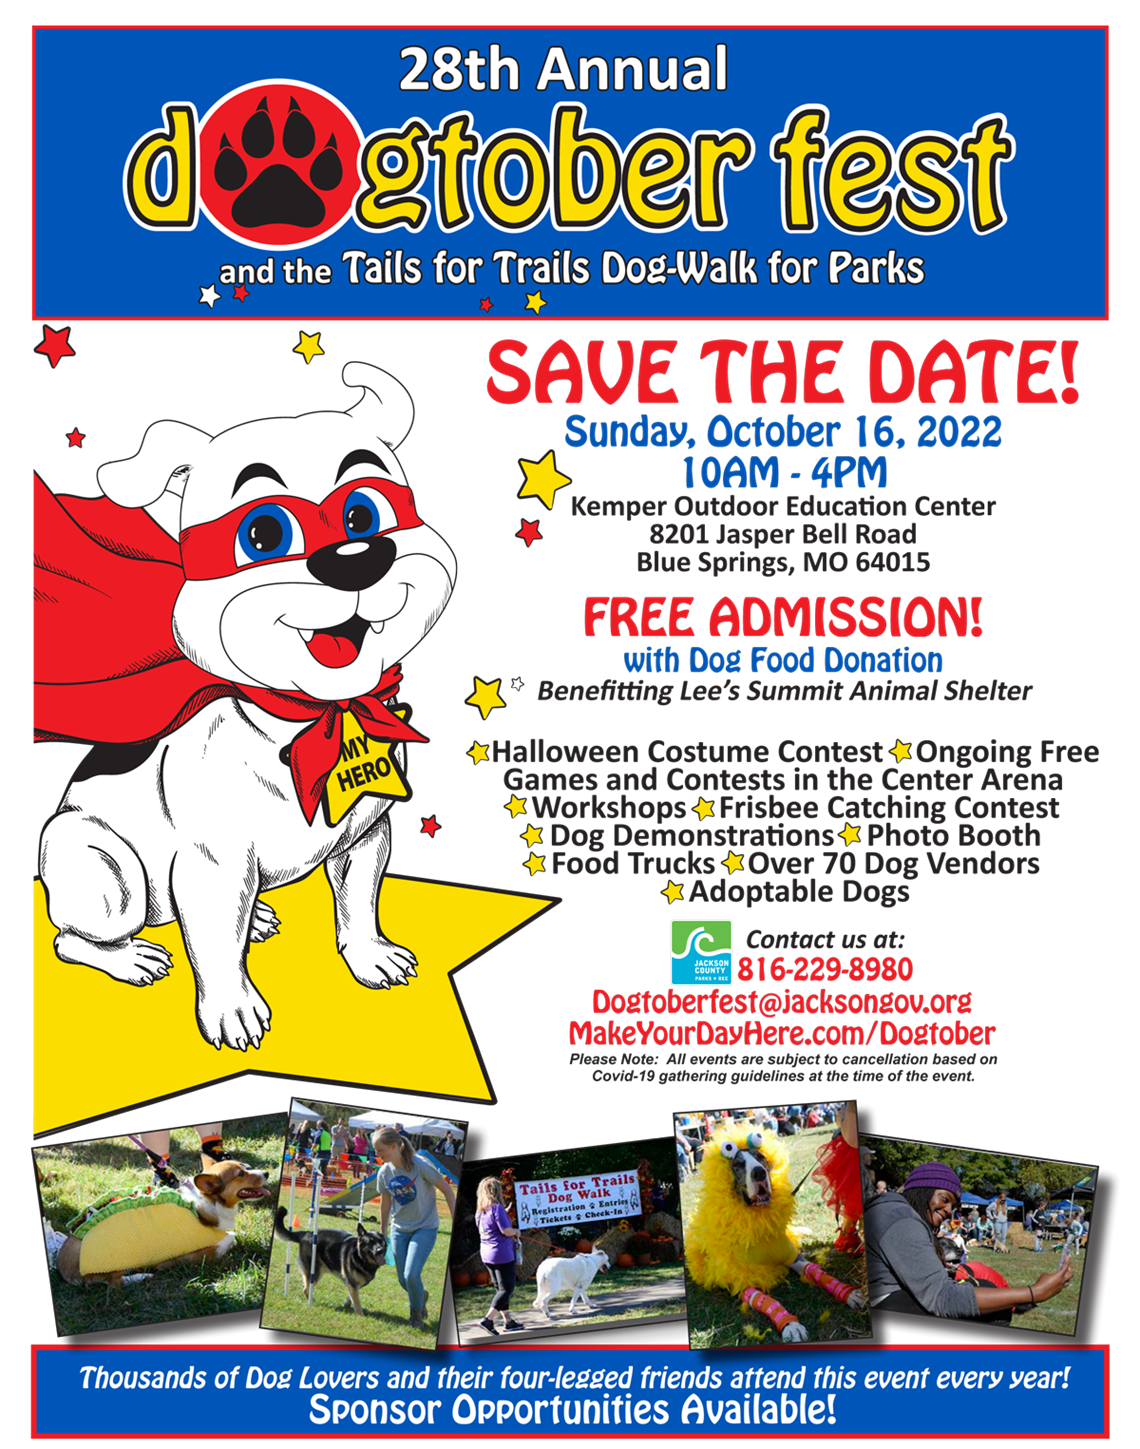 Jackson County Parks + Rec presents 28th Annual Dogtober Fest Lee's